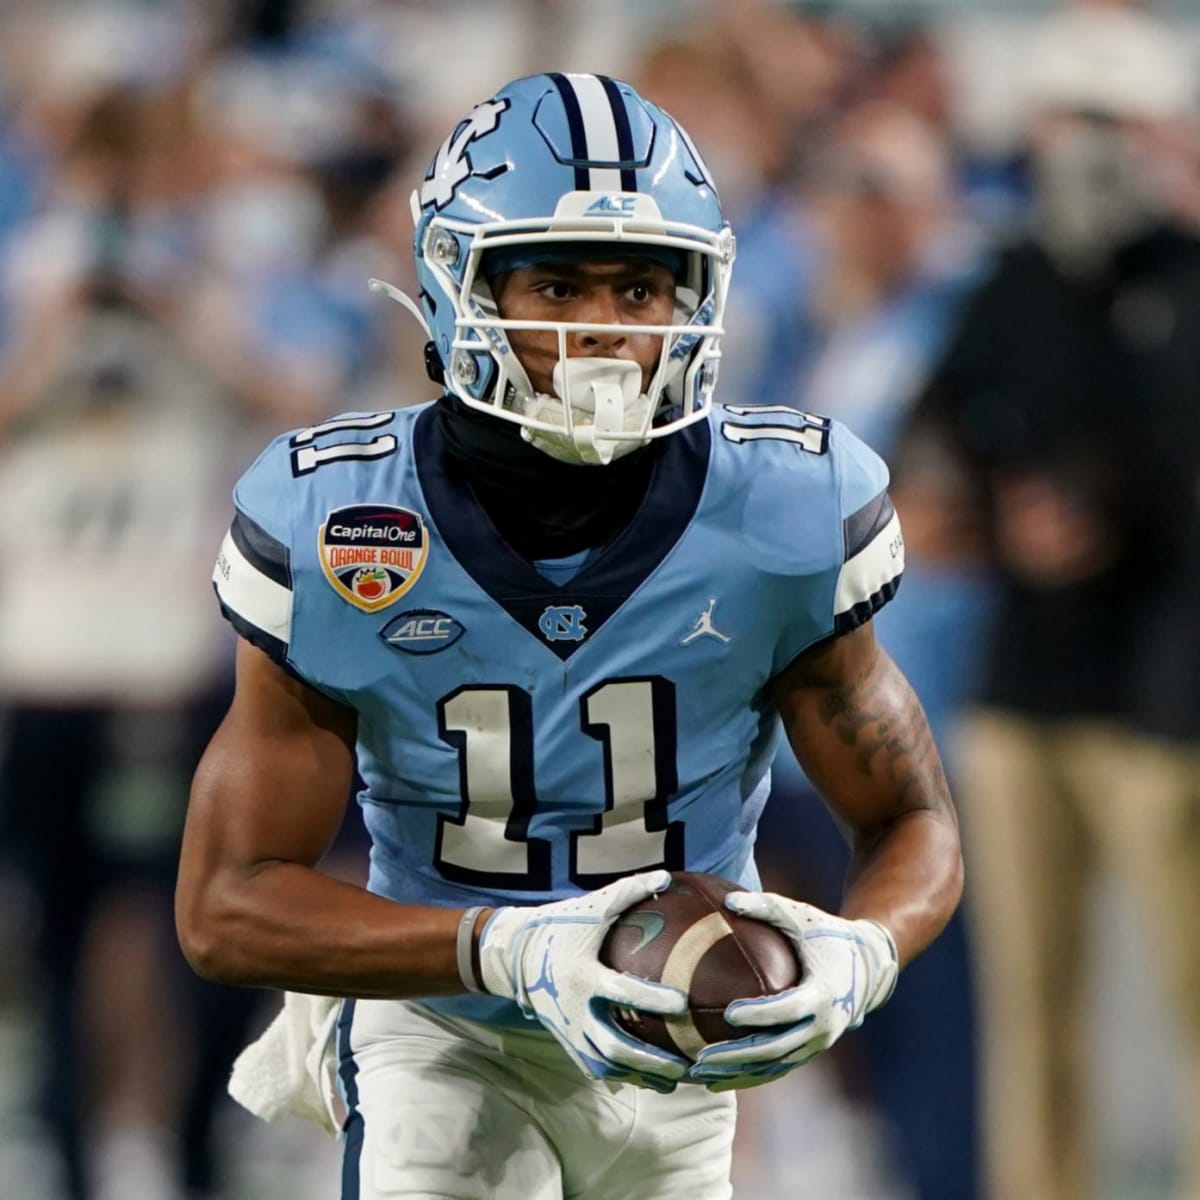 2023 NFL Draft: Josh Downs Declares for Draft - Visit NFL Draft on Sports  Illustrated, the latest news coverage, with rankings for NFL Draft  prospects, College Football, Dynasty and Devy Fantasy Football.